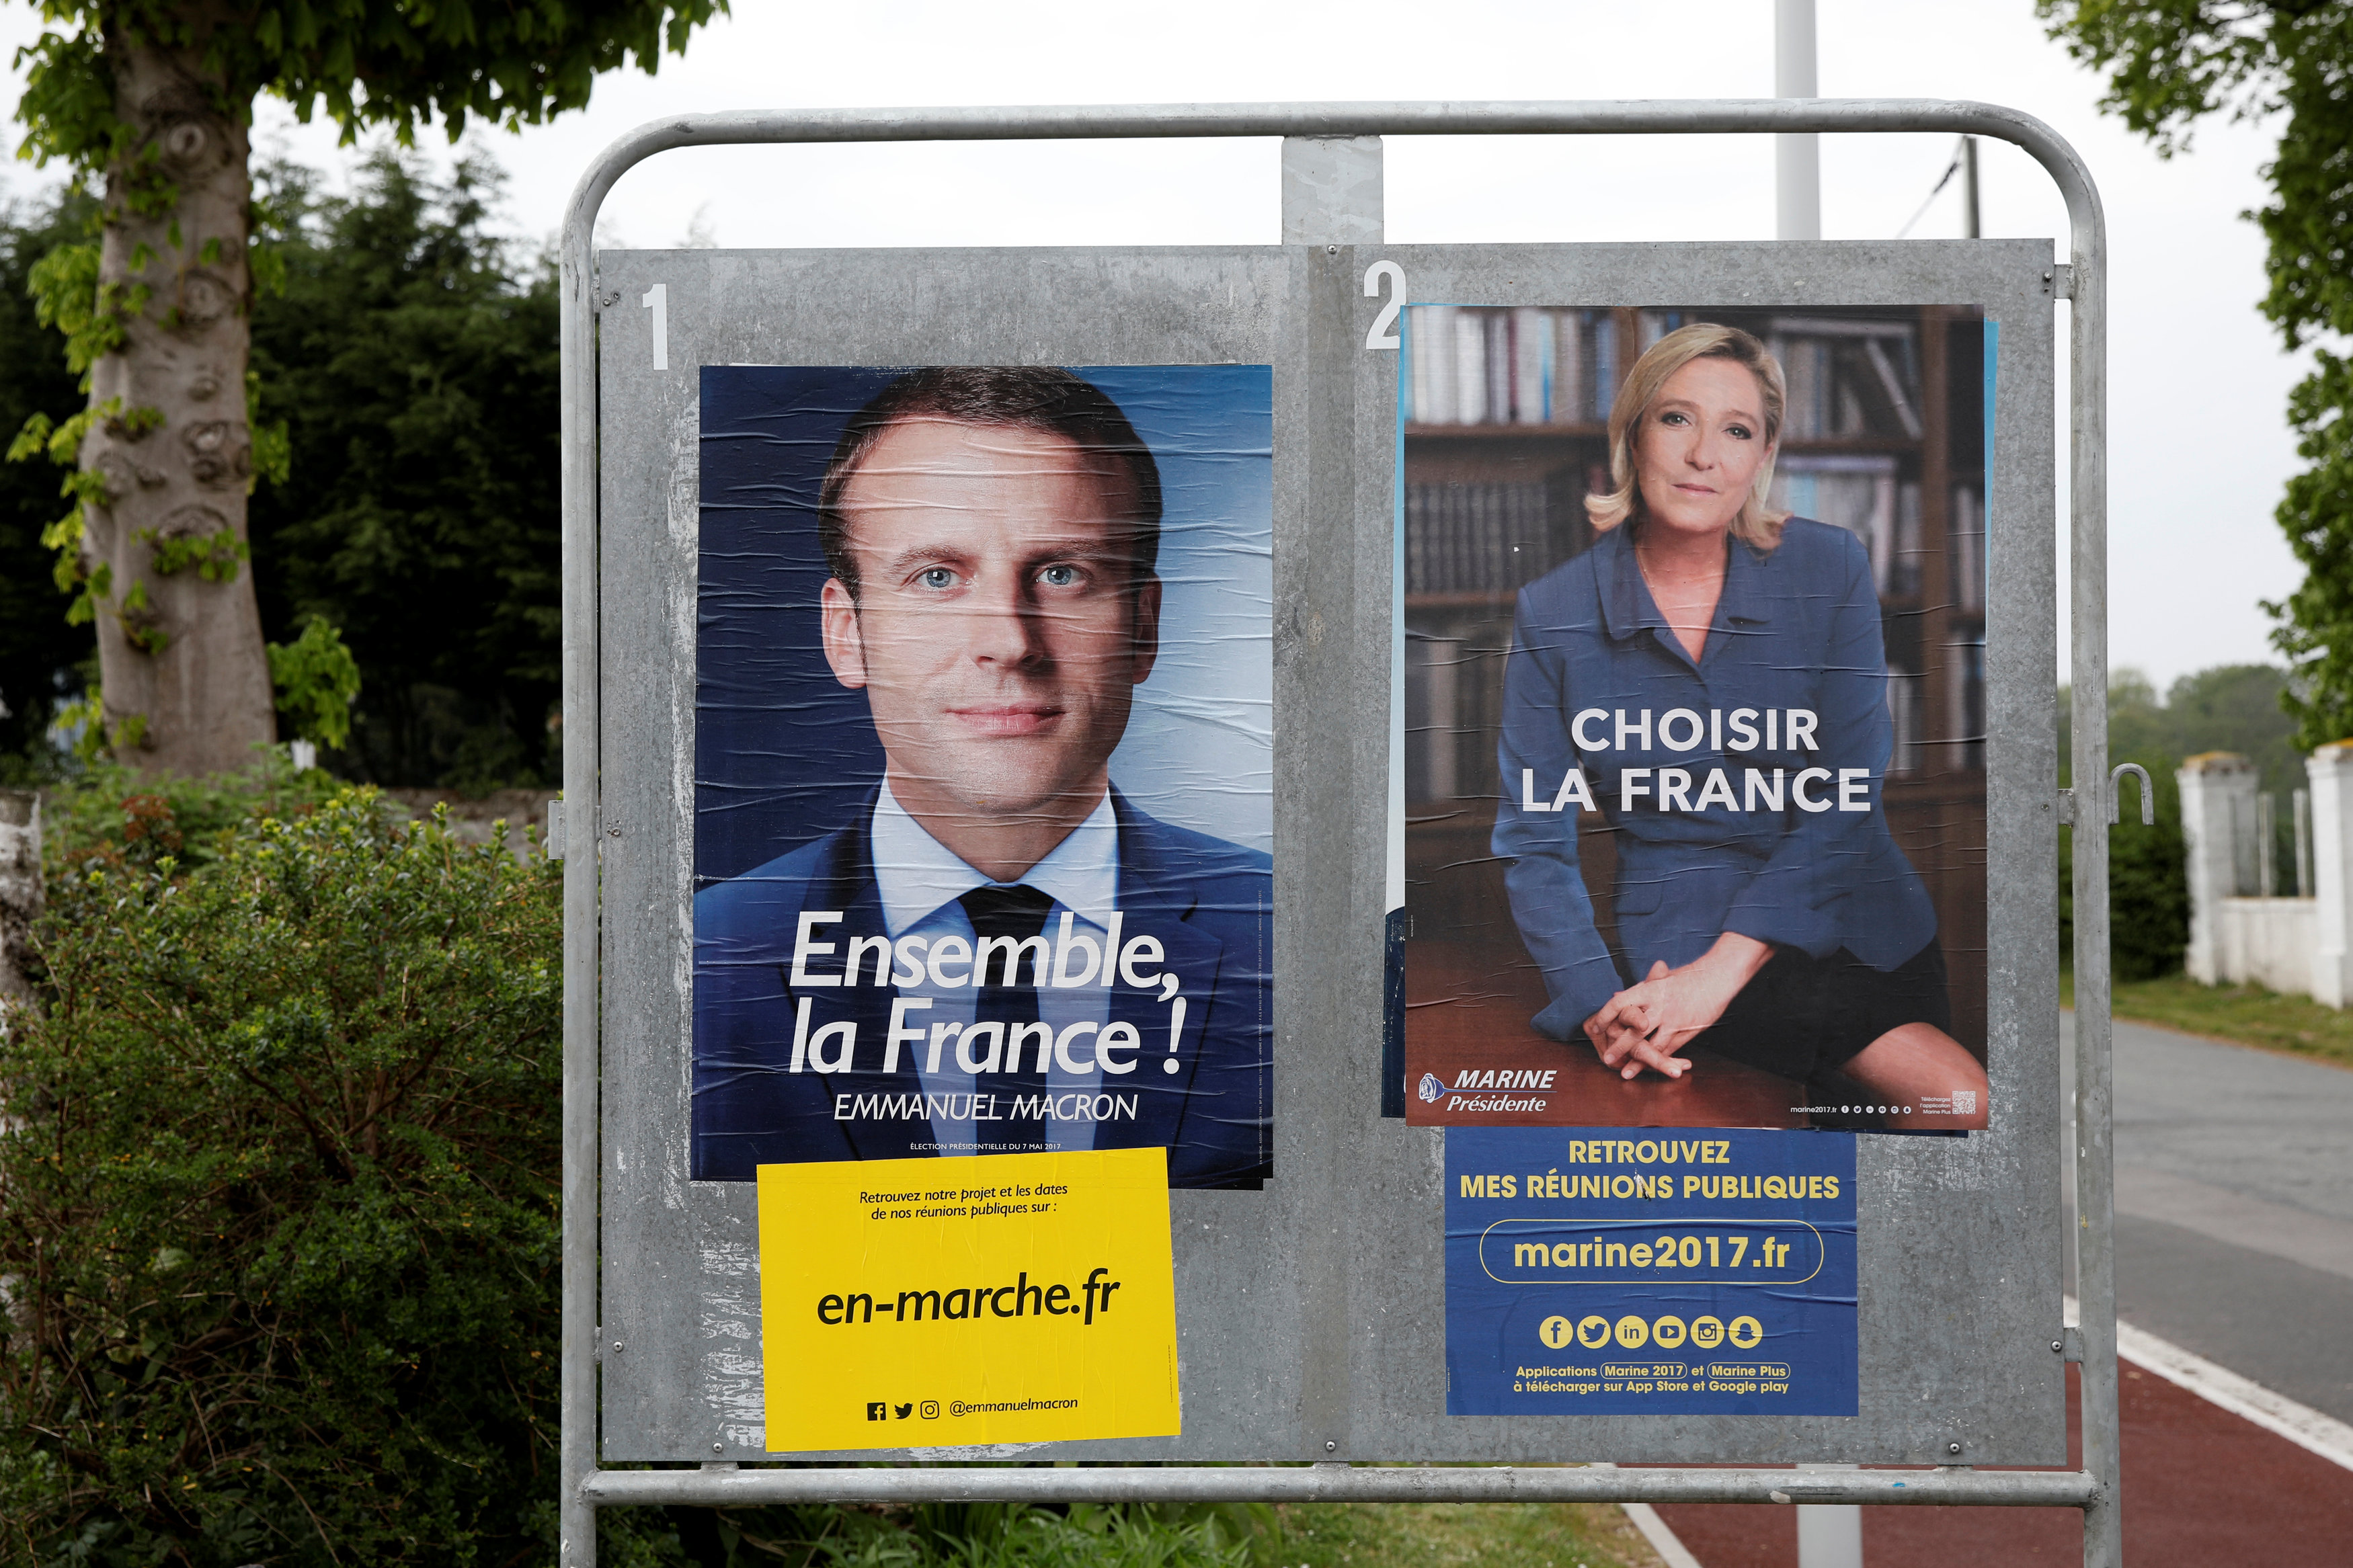 2017 05 05T175051Z 912761105 RC17769A6520 RTRMADP 3 FRANCE ELECTION